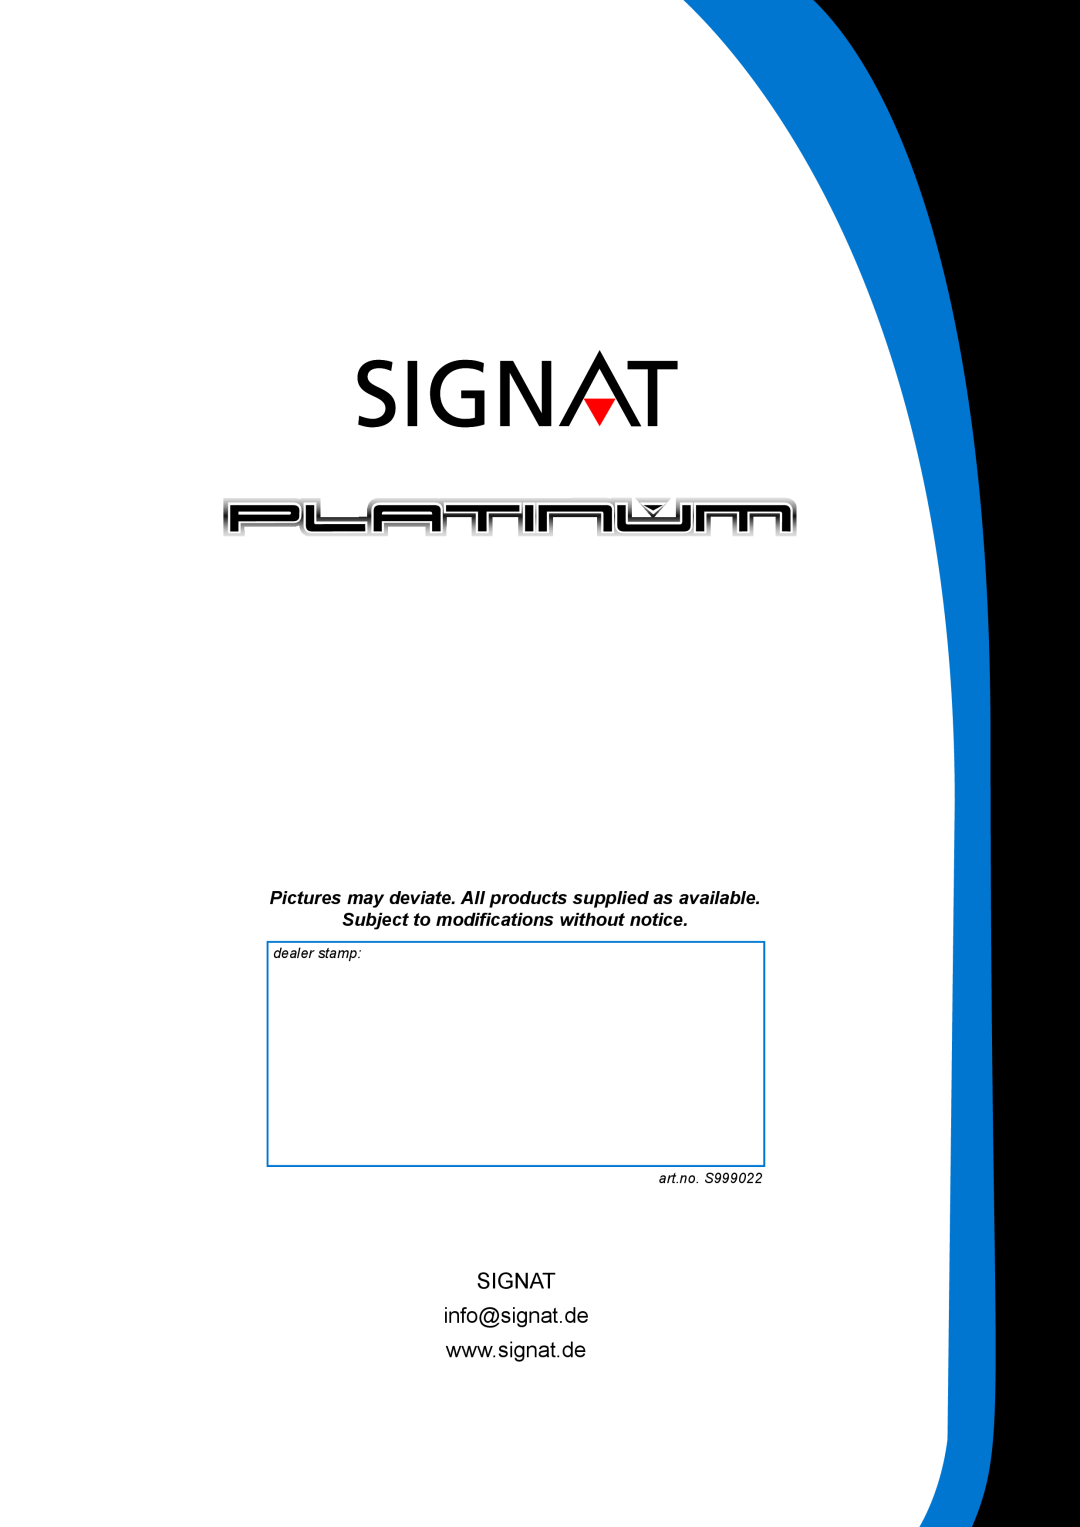 Signat S104201, S104001, S104105 manual Subject to modifications without notice, dealer stamp art.no. S999022 